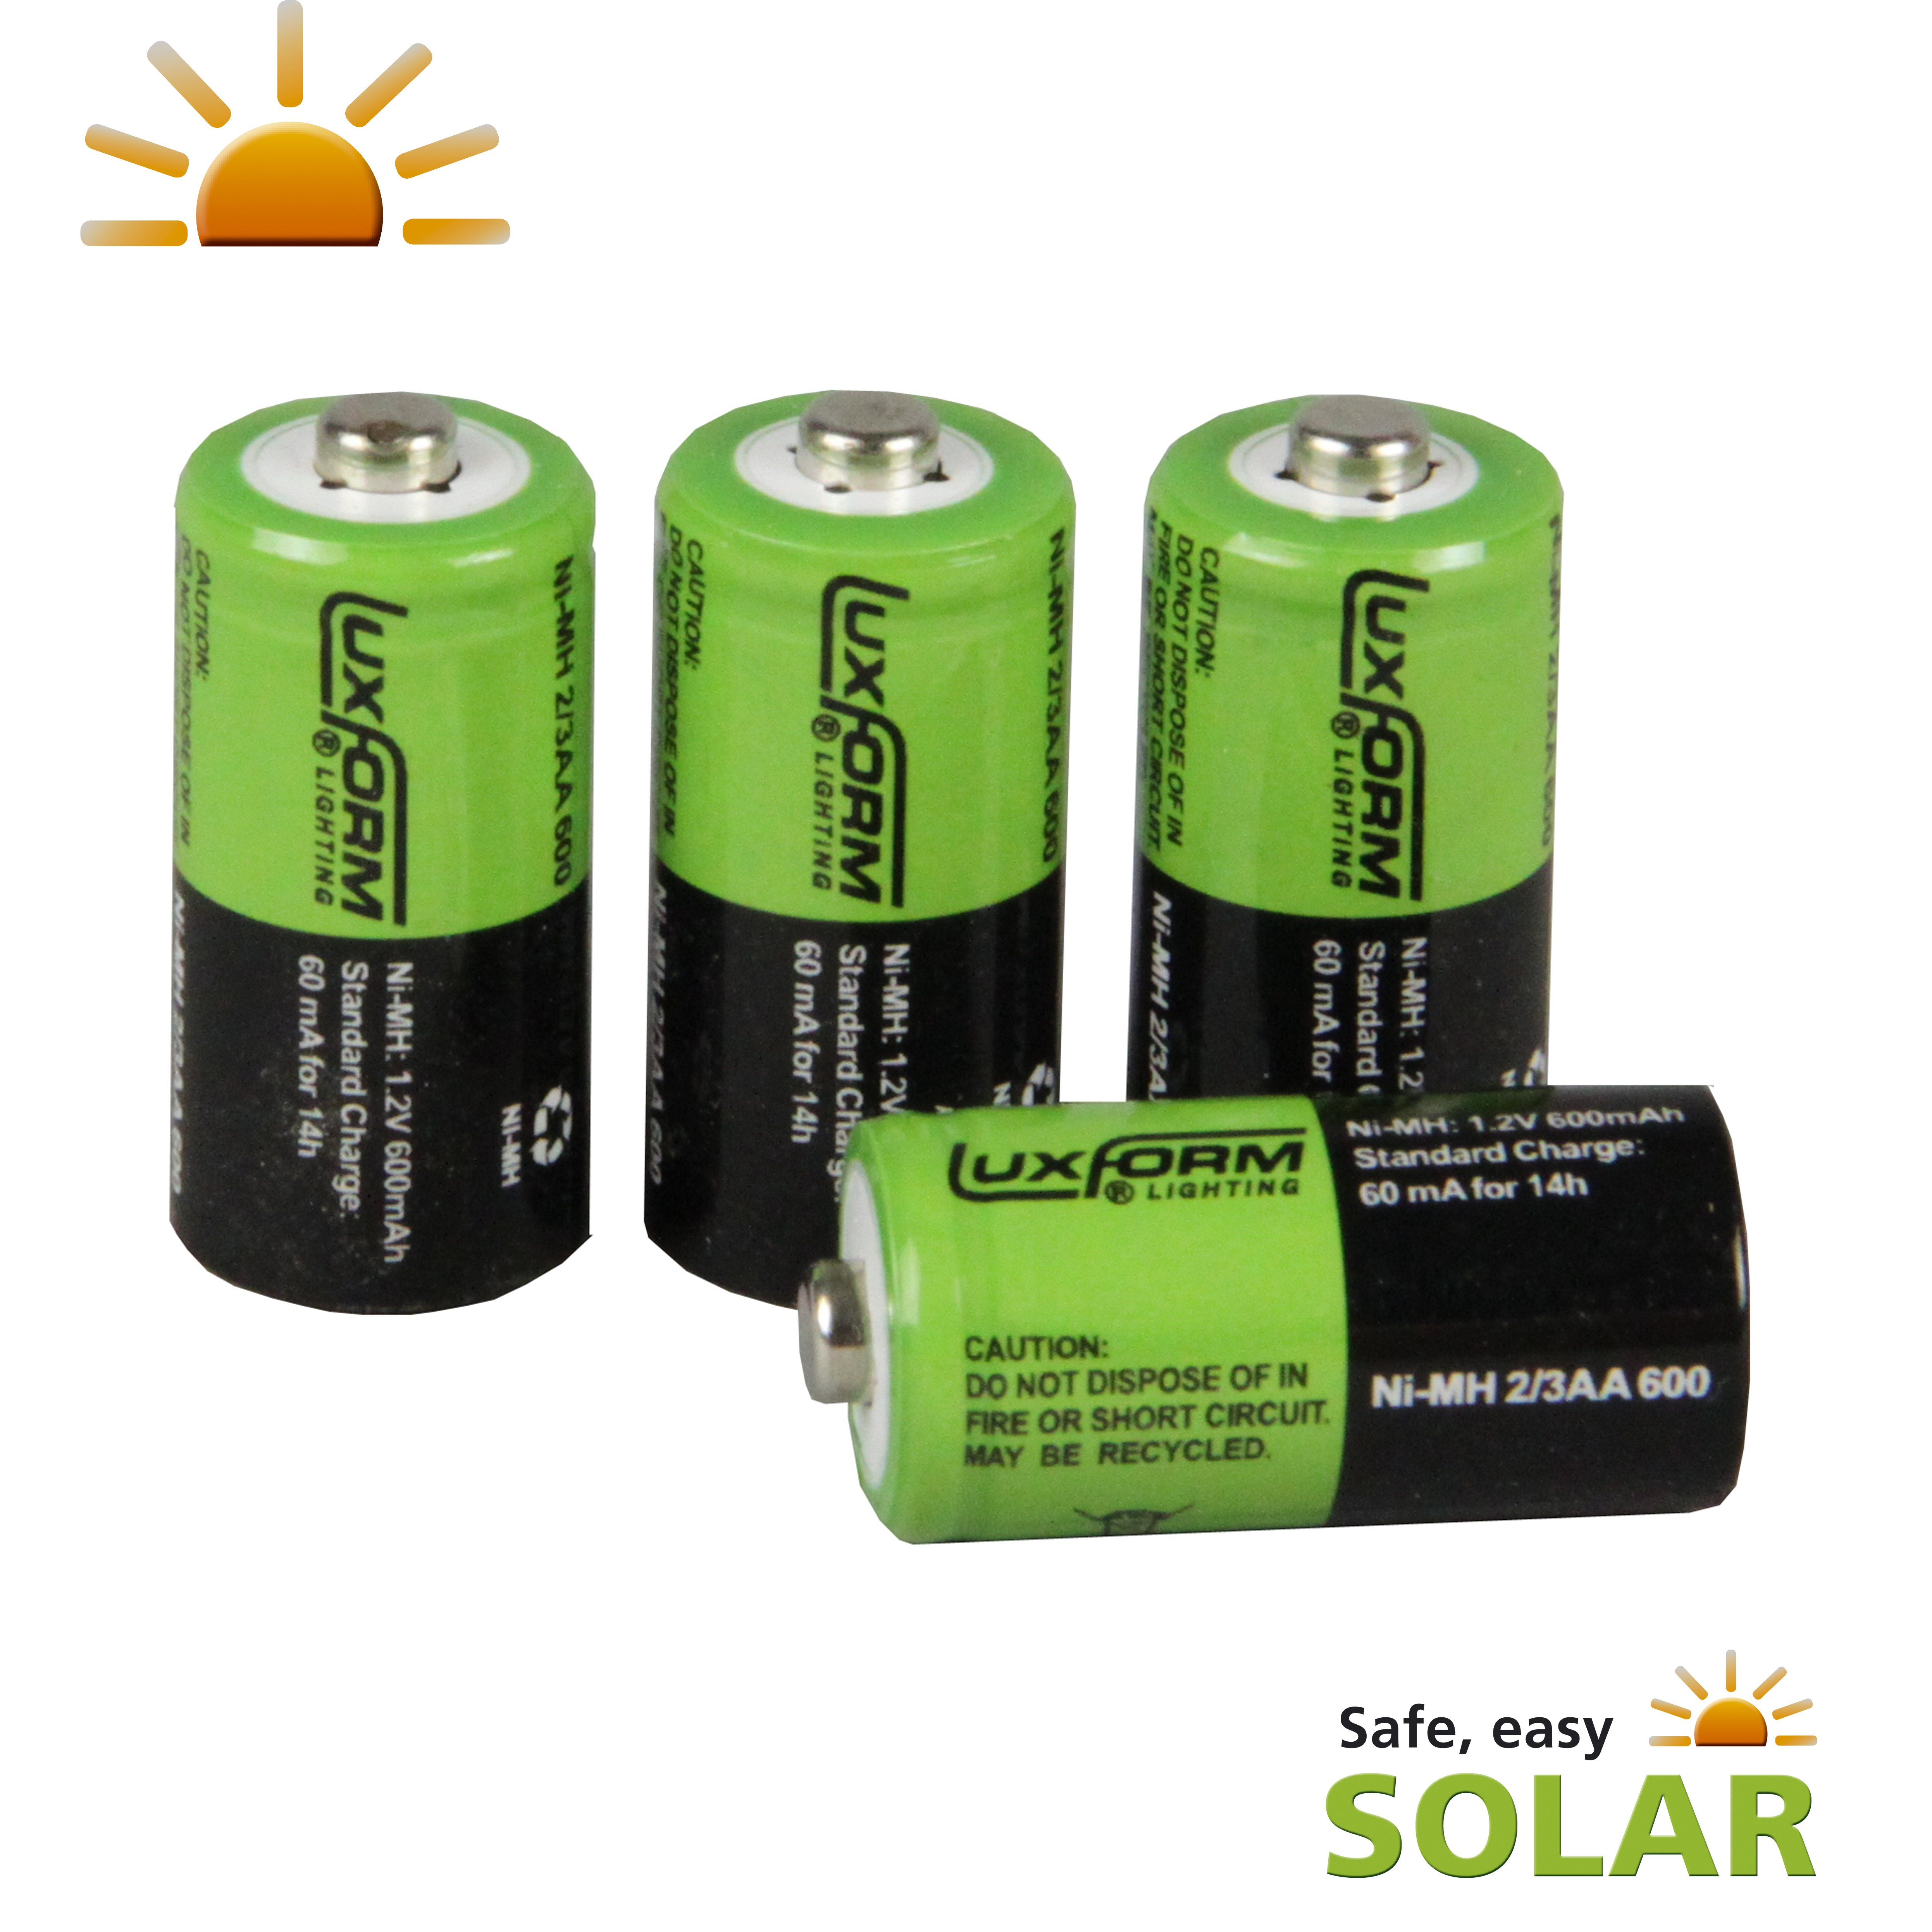 Luxform 23 AA Solar Rechargeable Battery 600mAh 12v 4 Pack